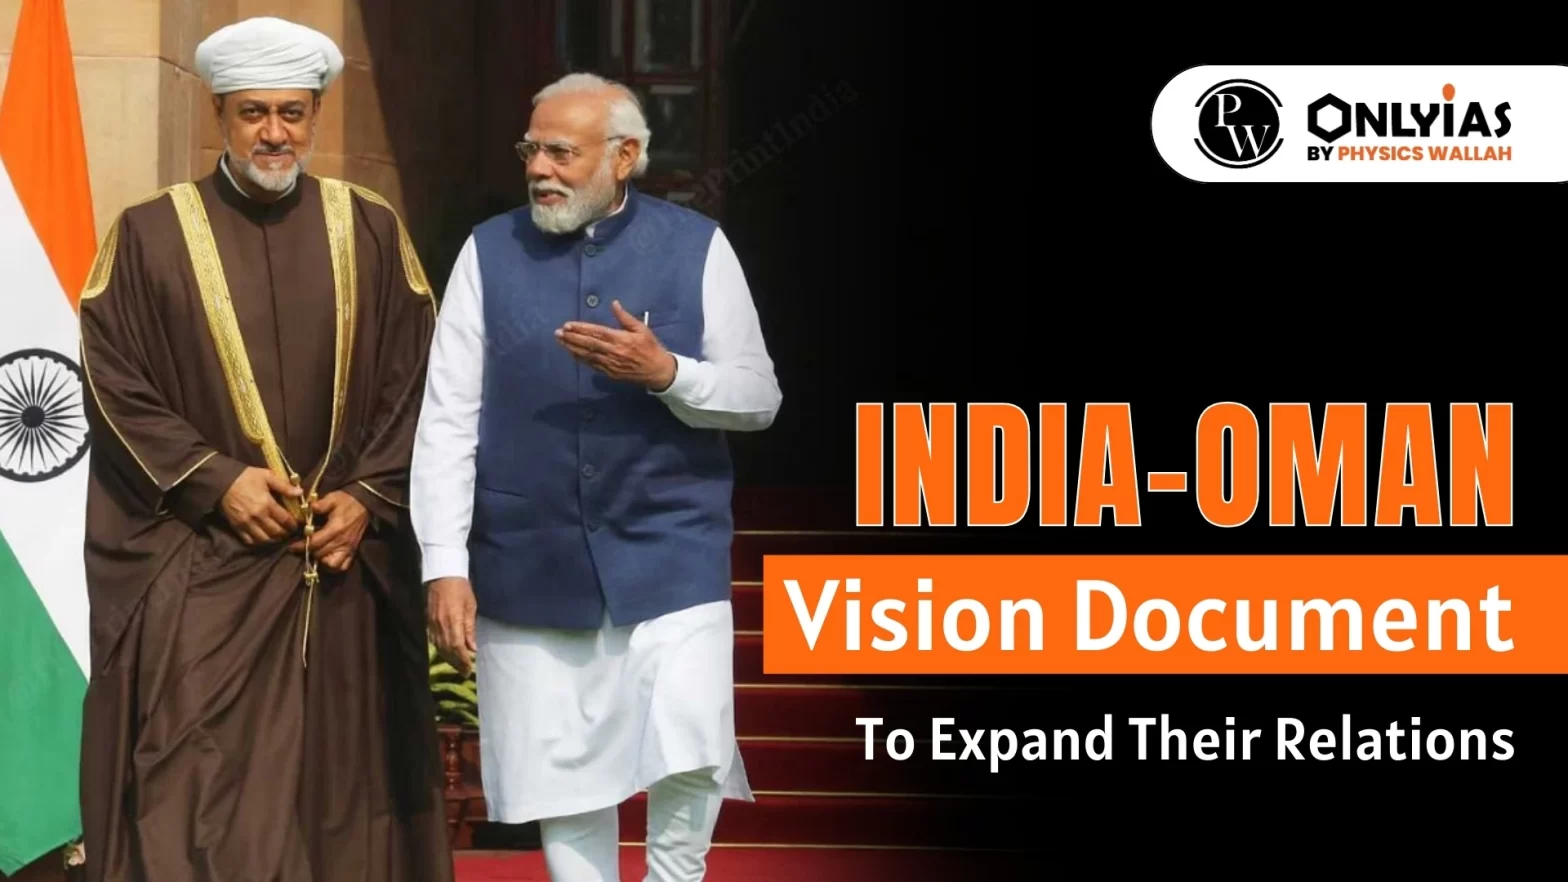 India-Oman Vision Document To Expand Their Relations